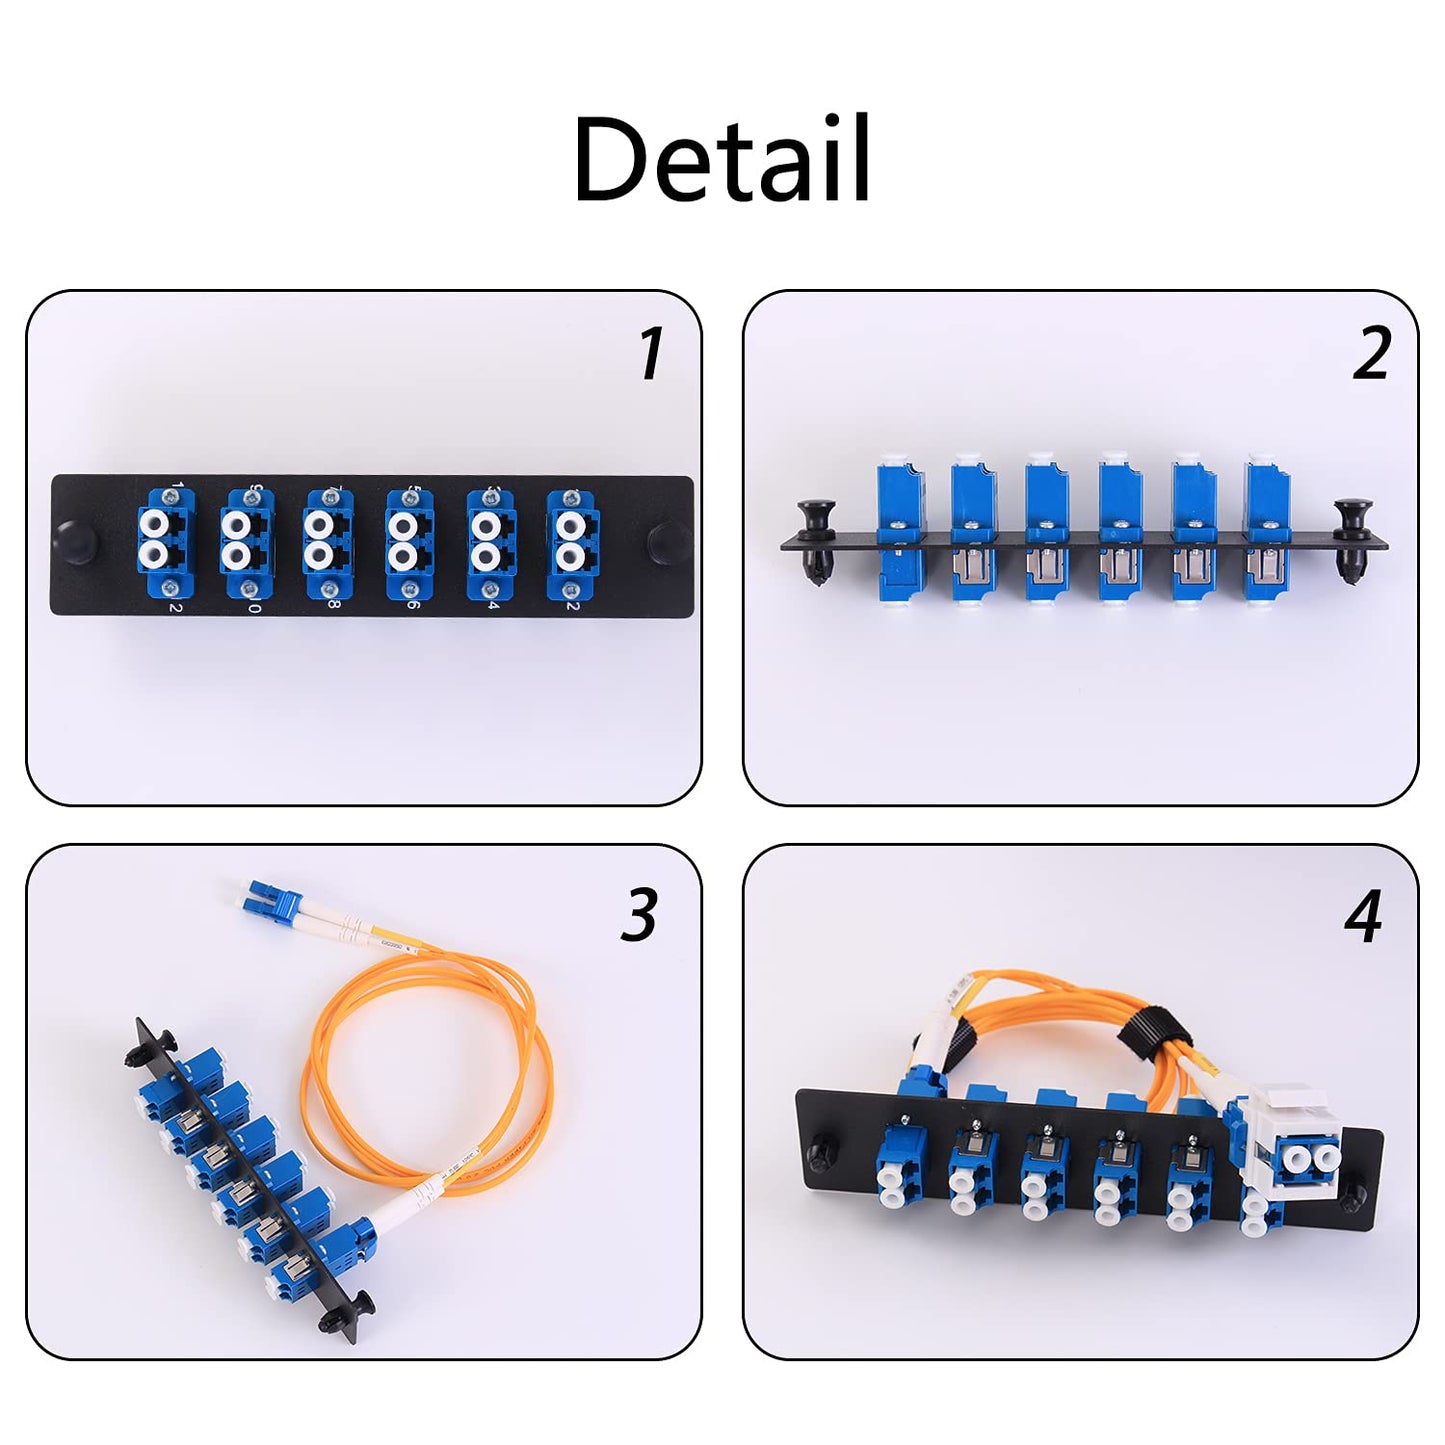 RiteAV - Fiber Patch Panel Enclosure LGX Compatible, LC UPC Blue, Single Mode and Multimode Compatible for 1.25G/10GB OS1-2/OM1-3 Networks